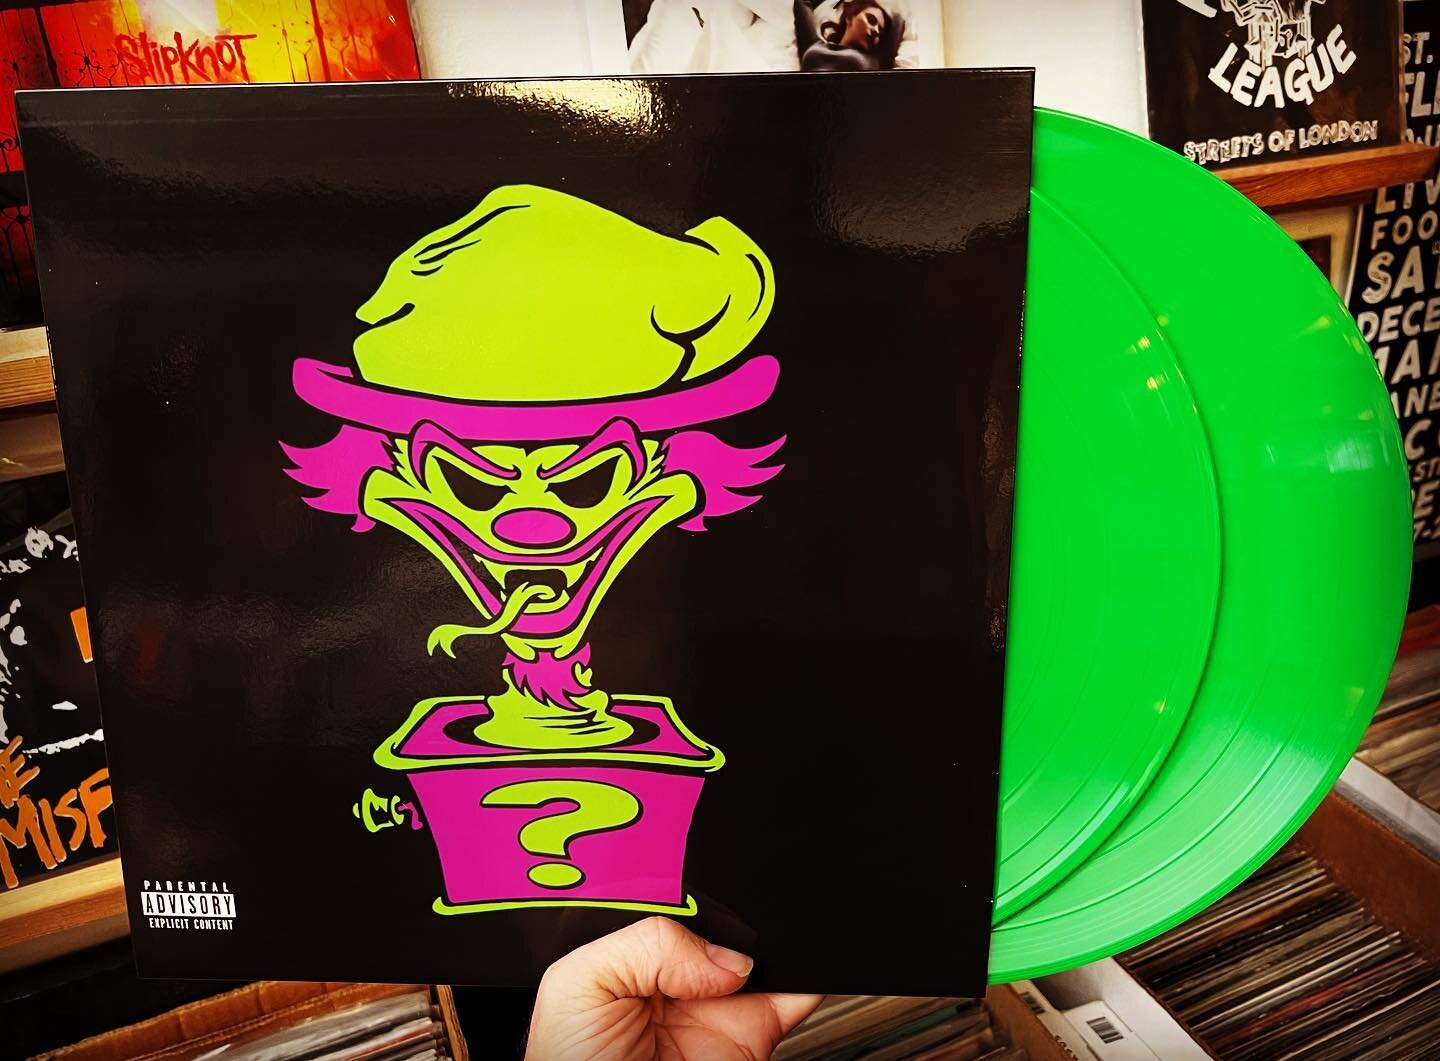 PM or stop by the shop to purchase.  #icp #insaneclownposse #riddlebox #coloredvinyl #vinylcollection #recordcollection #shaggy2dope #violentj #hiphop #recordsforsale #vinylporn #downwiththeclown #recordstore